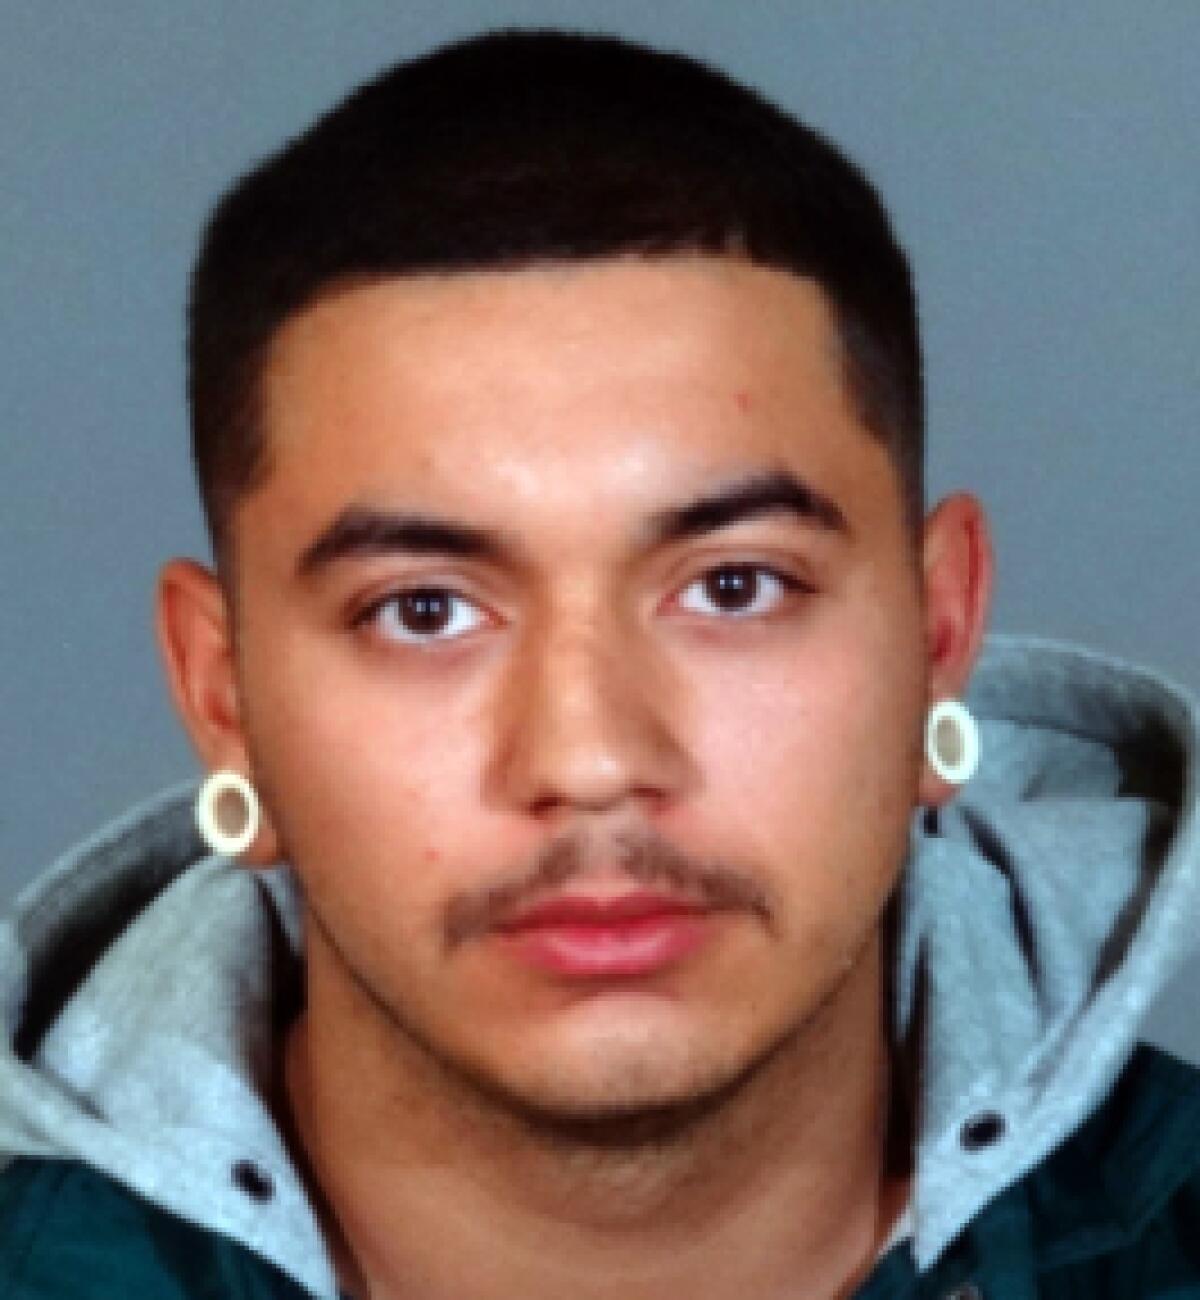 Oscar Palazuelos is being sought as a suspect in the killing of Ismael Zabala on Dec. 20, 2020.